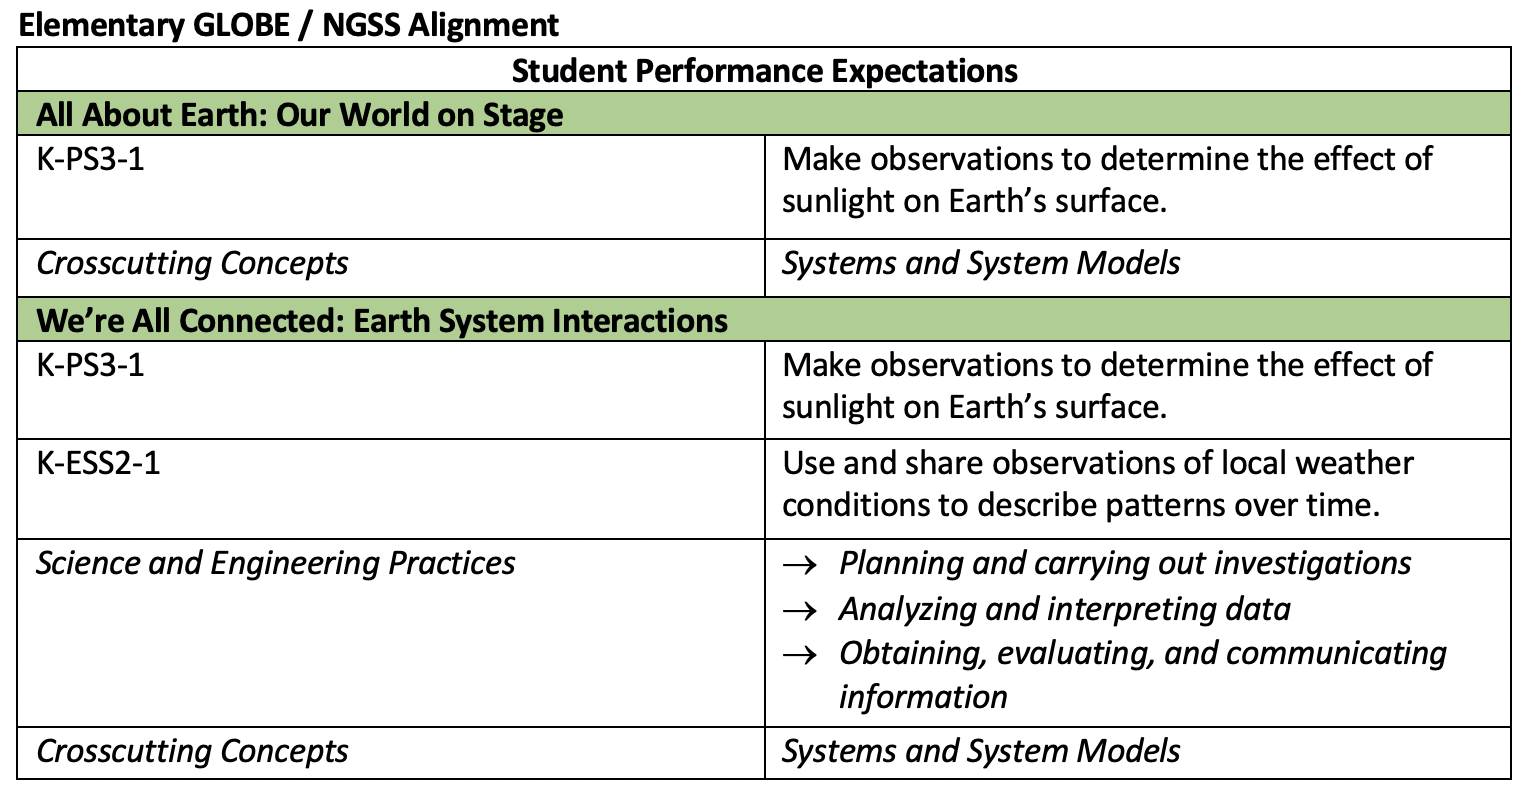 Student Performance Expectations All About Earth: Our World on Stage K-PS3-1	Make observations to determine the effect of sunlight on Earth’s surface. Crosscutting Concepts	Systems and System Models We’re All Connected: Earth System Interactions K-PS3-1	Make observations to determine the effect of sunlight on Earth’s surface. K-ESS2-1	Use and share observations of local weather conditions to describe patterns over time. Science and Engineering Practices		Planning and carrying out investigations 	Analyzing and interpreting data 	Obtaining, evaluating, and communicating information Crosscutting Concepts	Systems and System Models